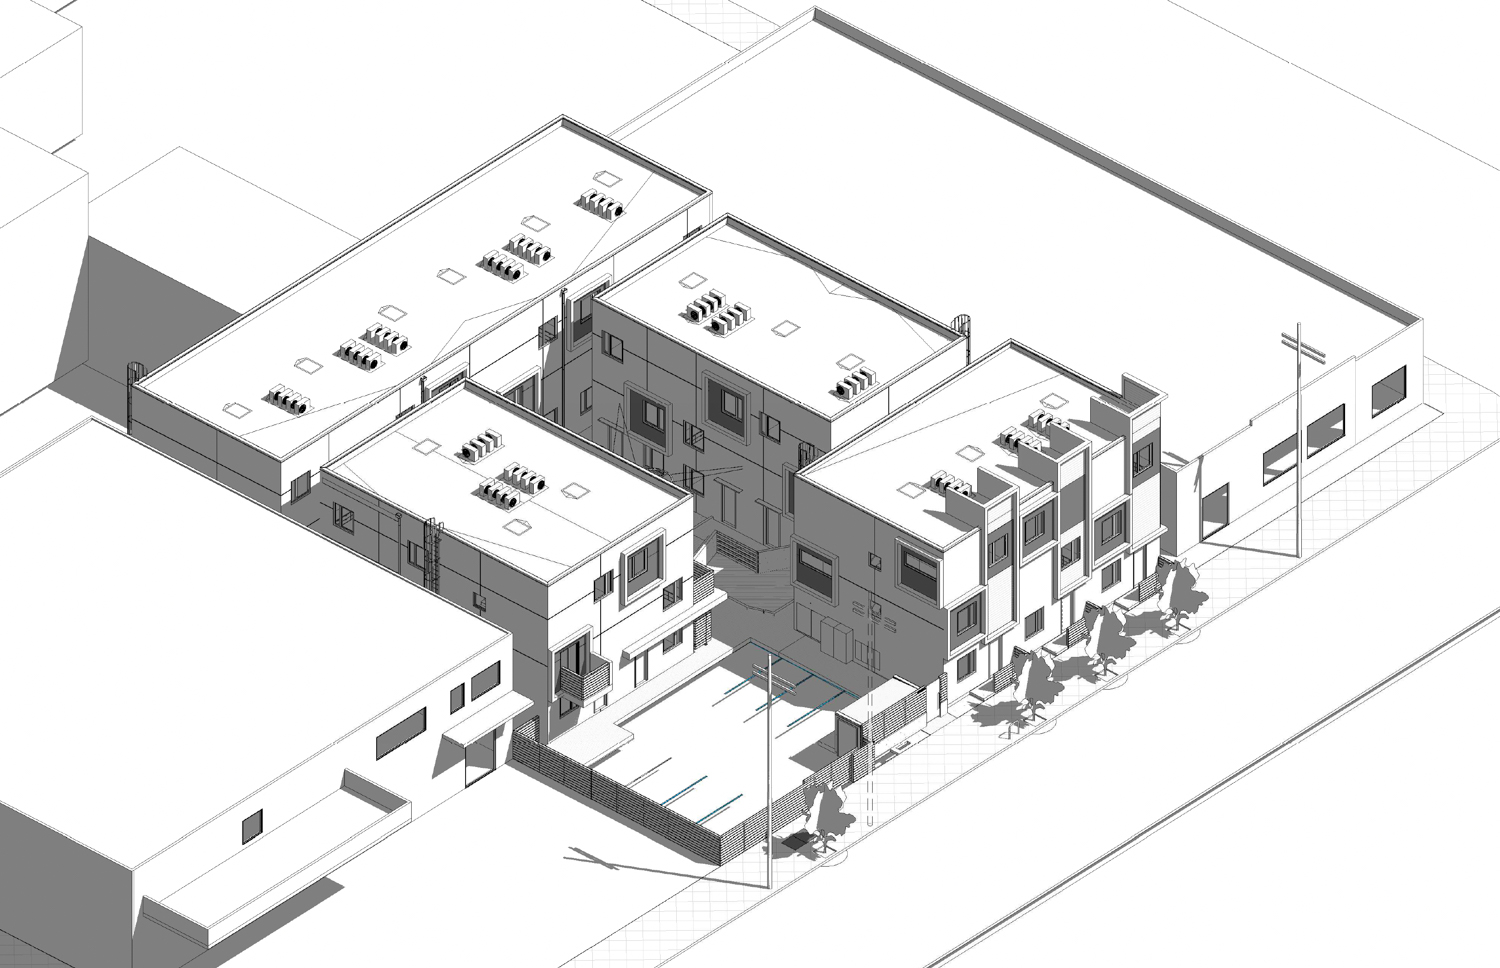 Southwest aerial axon view of 825 6th Avenue, illustration by Baran Studio Architecture